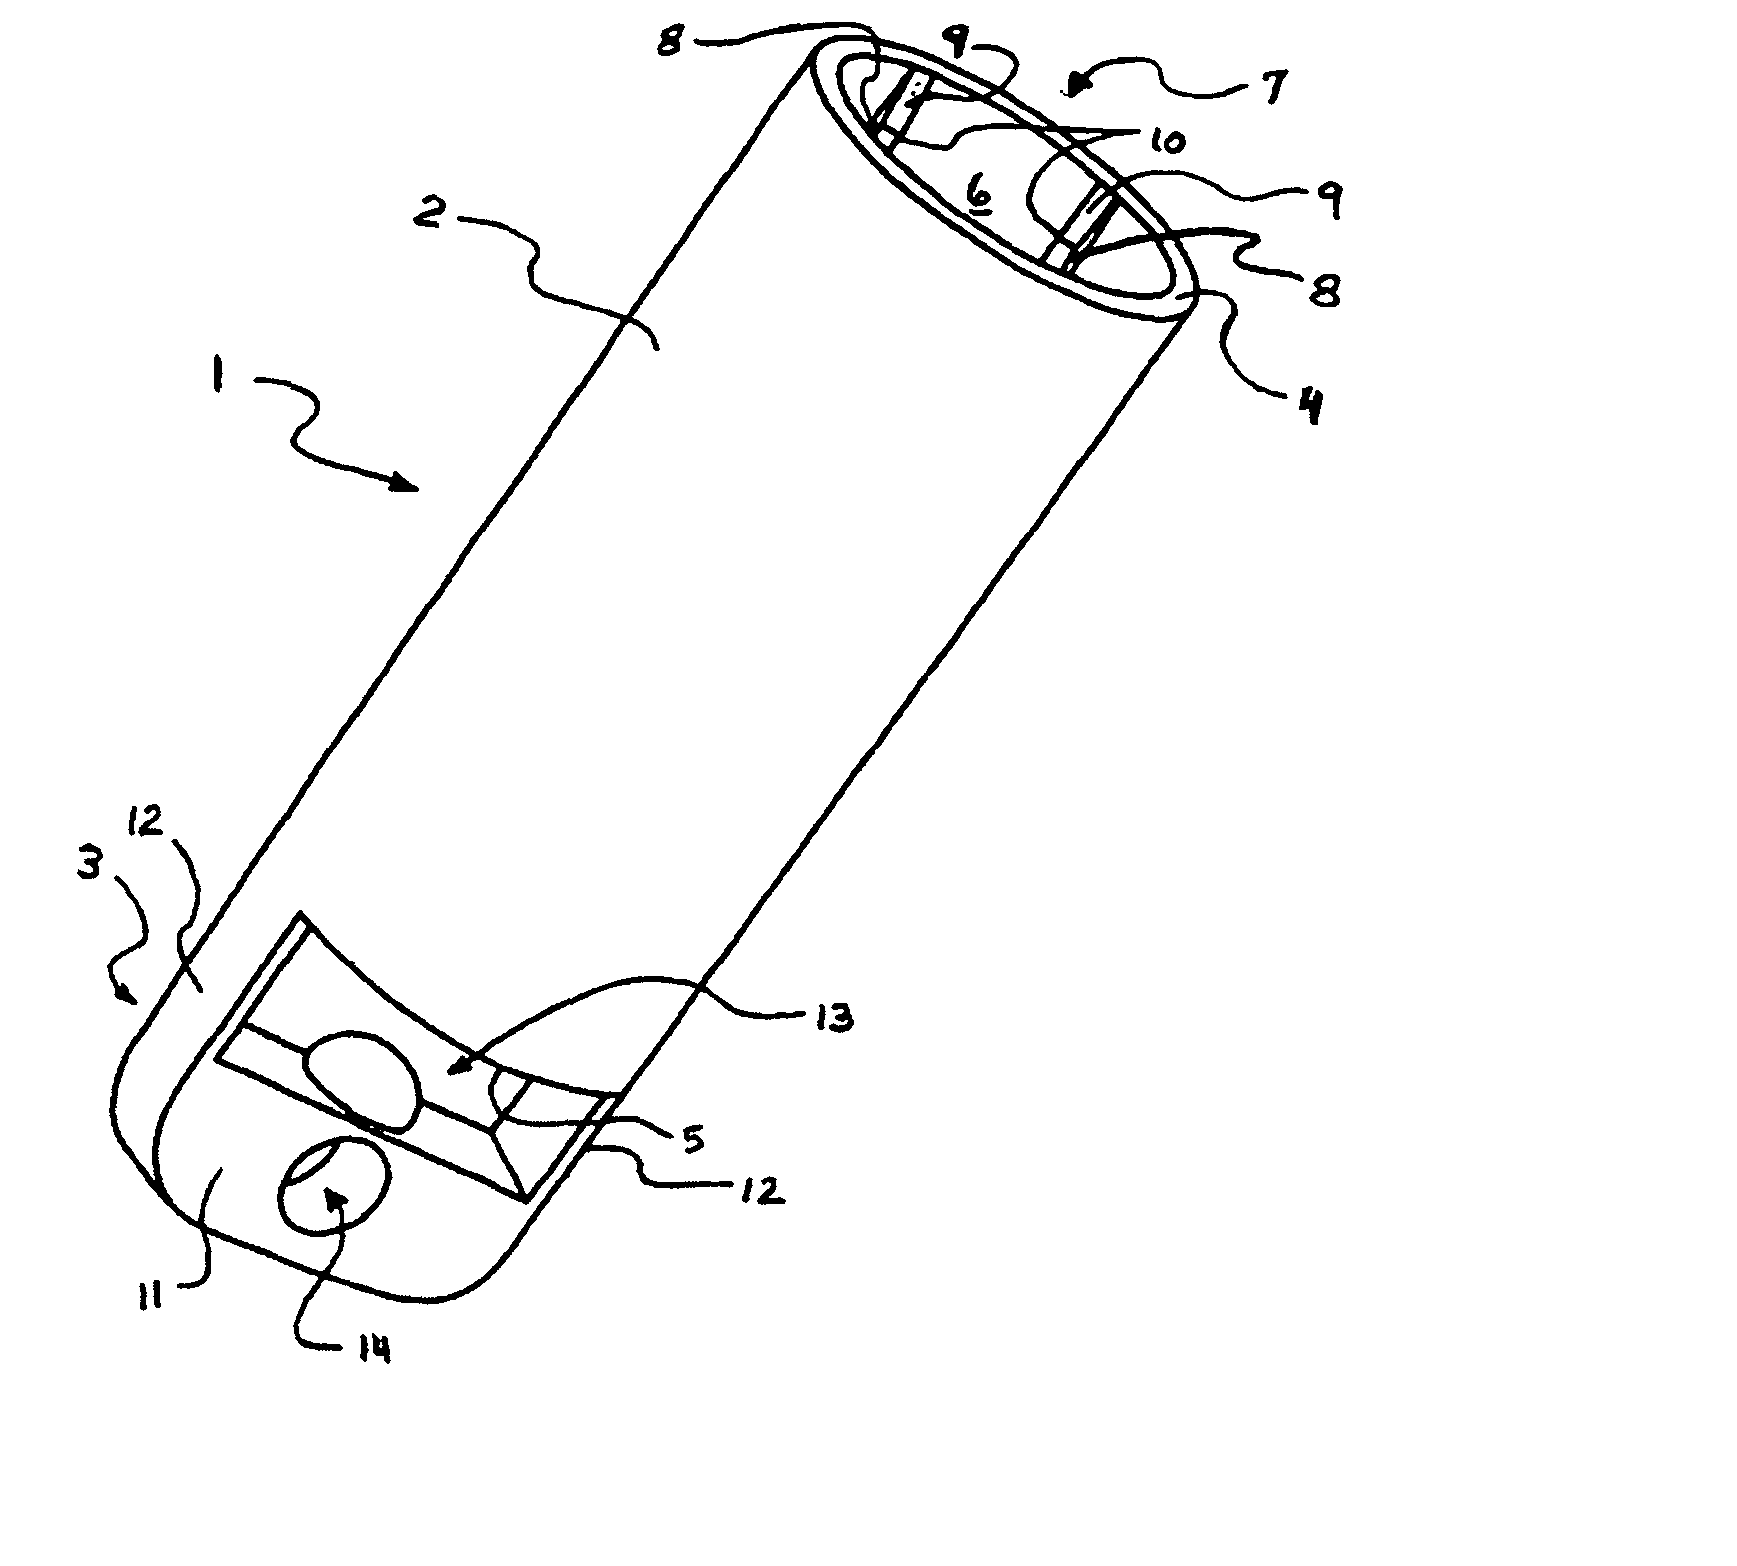 Attachable housing for holding, carrying, and using elongated personal items